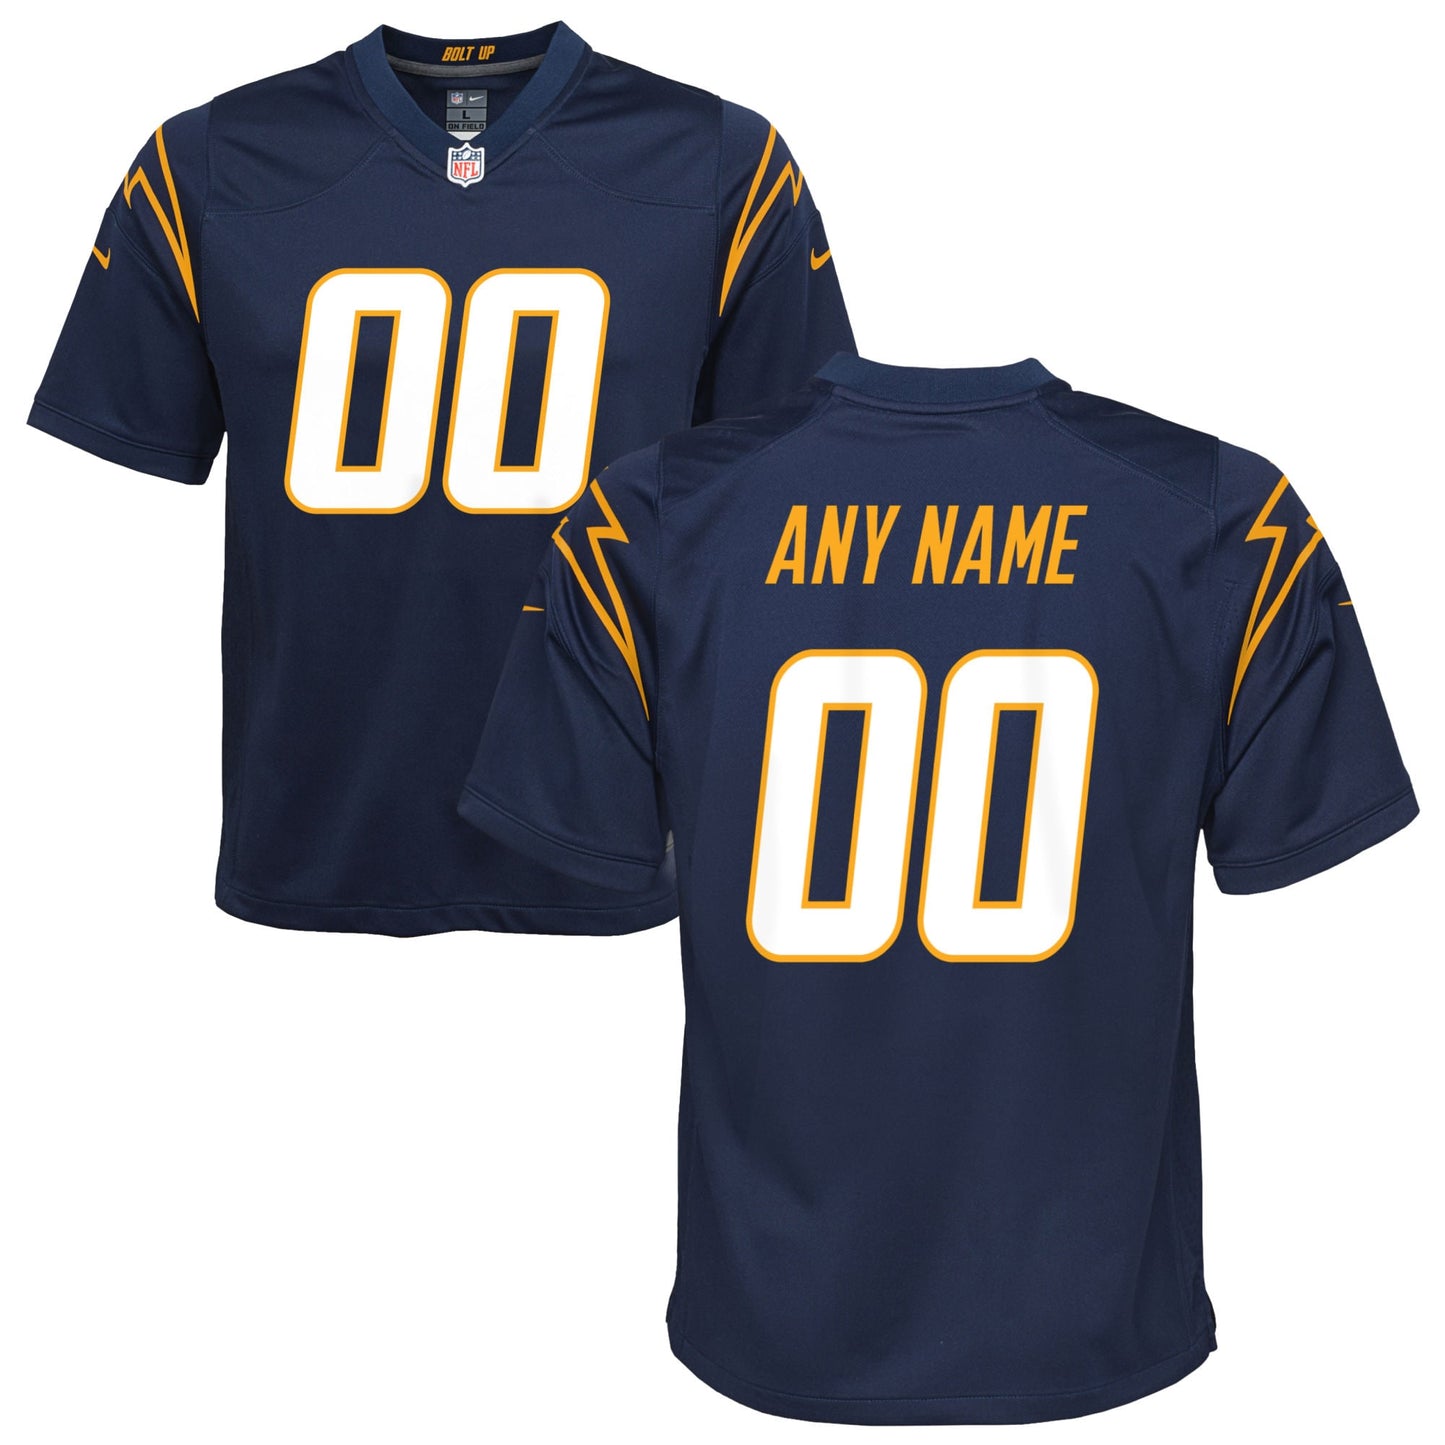 Los Angeles Chargers Nike Youth Alternate Custom Game Jersey - Navy